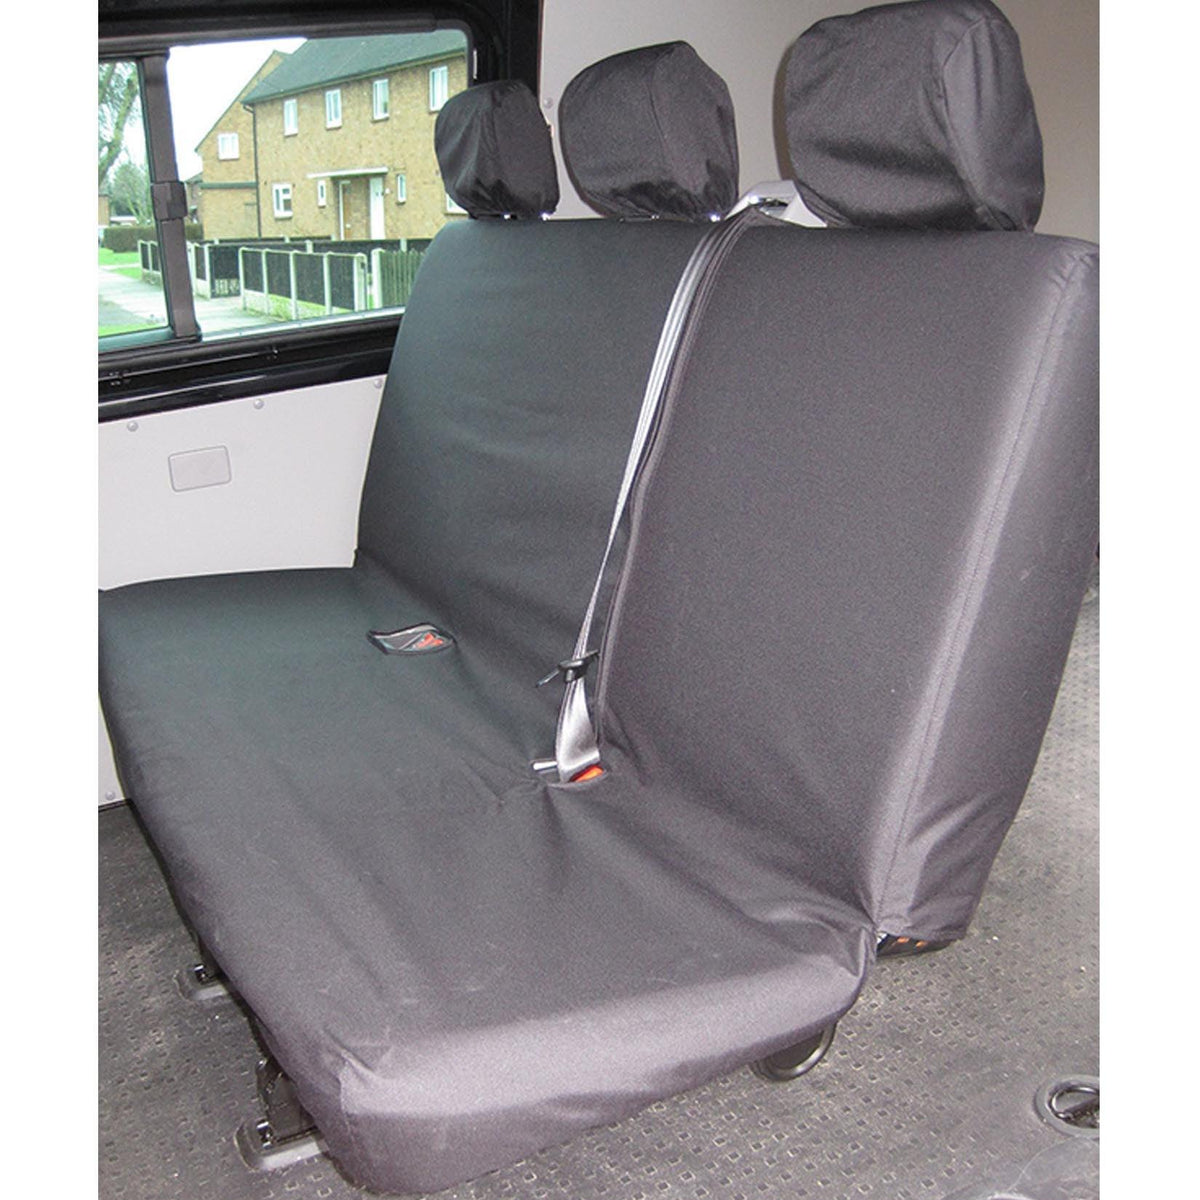 VW TRANSPORTER T5 2003-2009 REAR BENCH SEAT COVERS – GREY - Storm Xccessories2